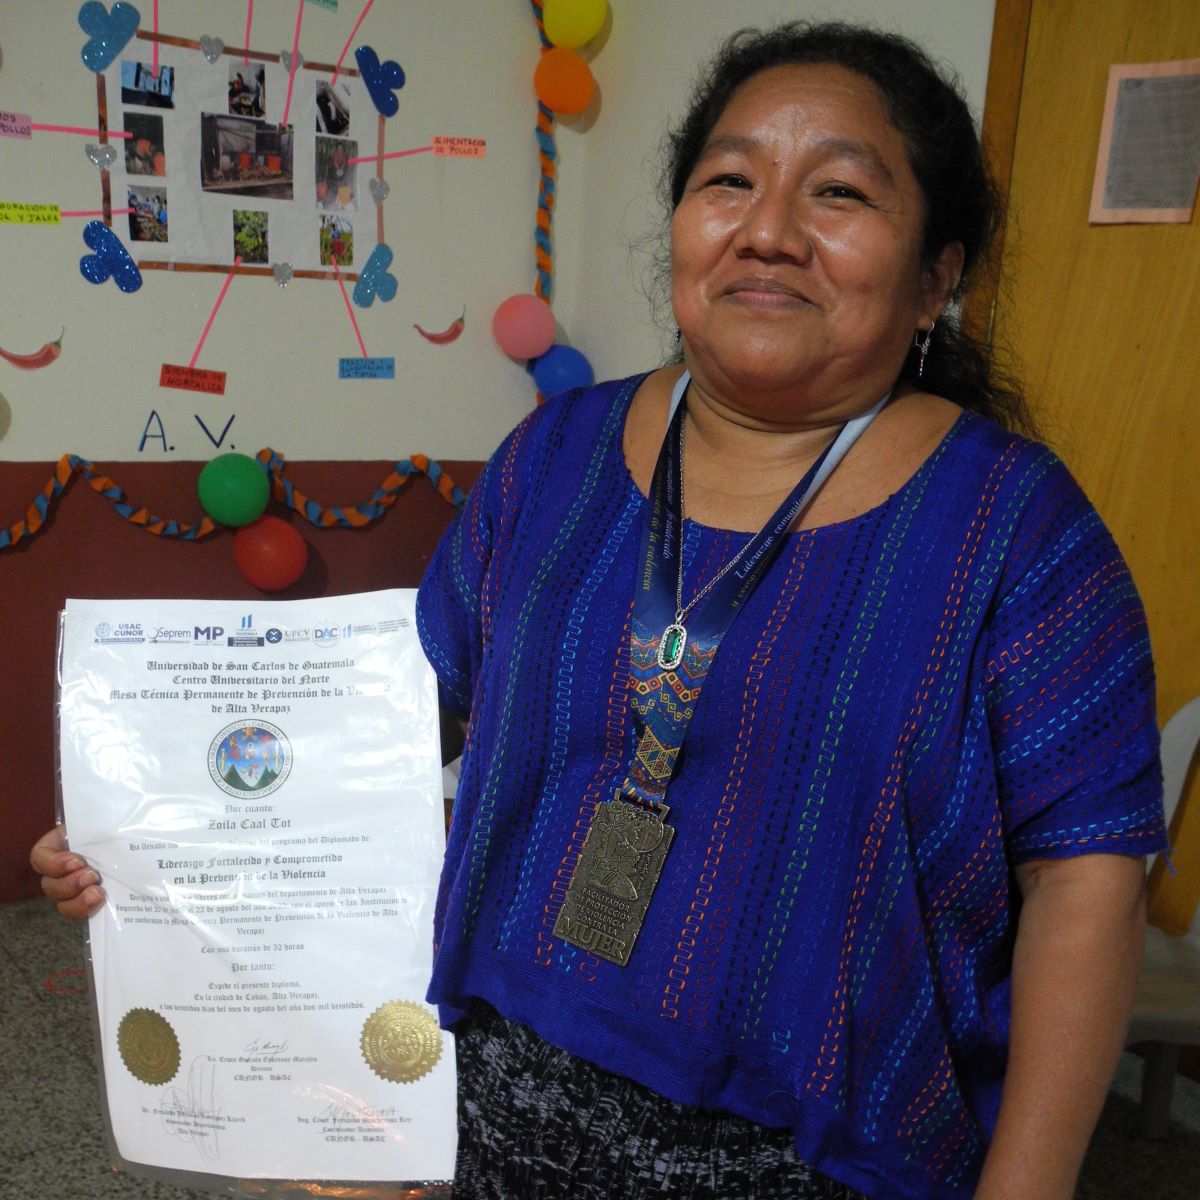 Zoila trains women on how to protect themselves against violence.